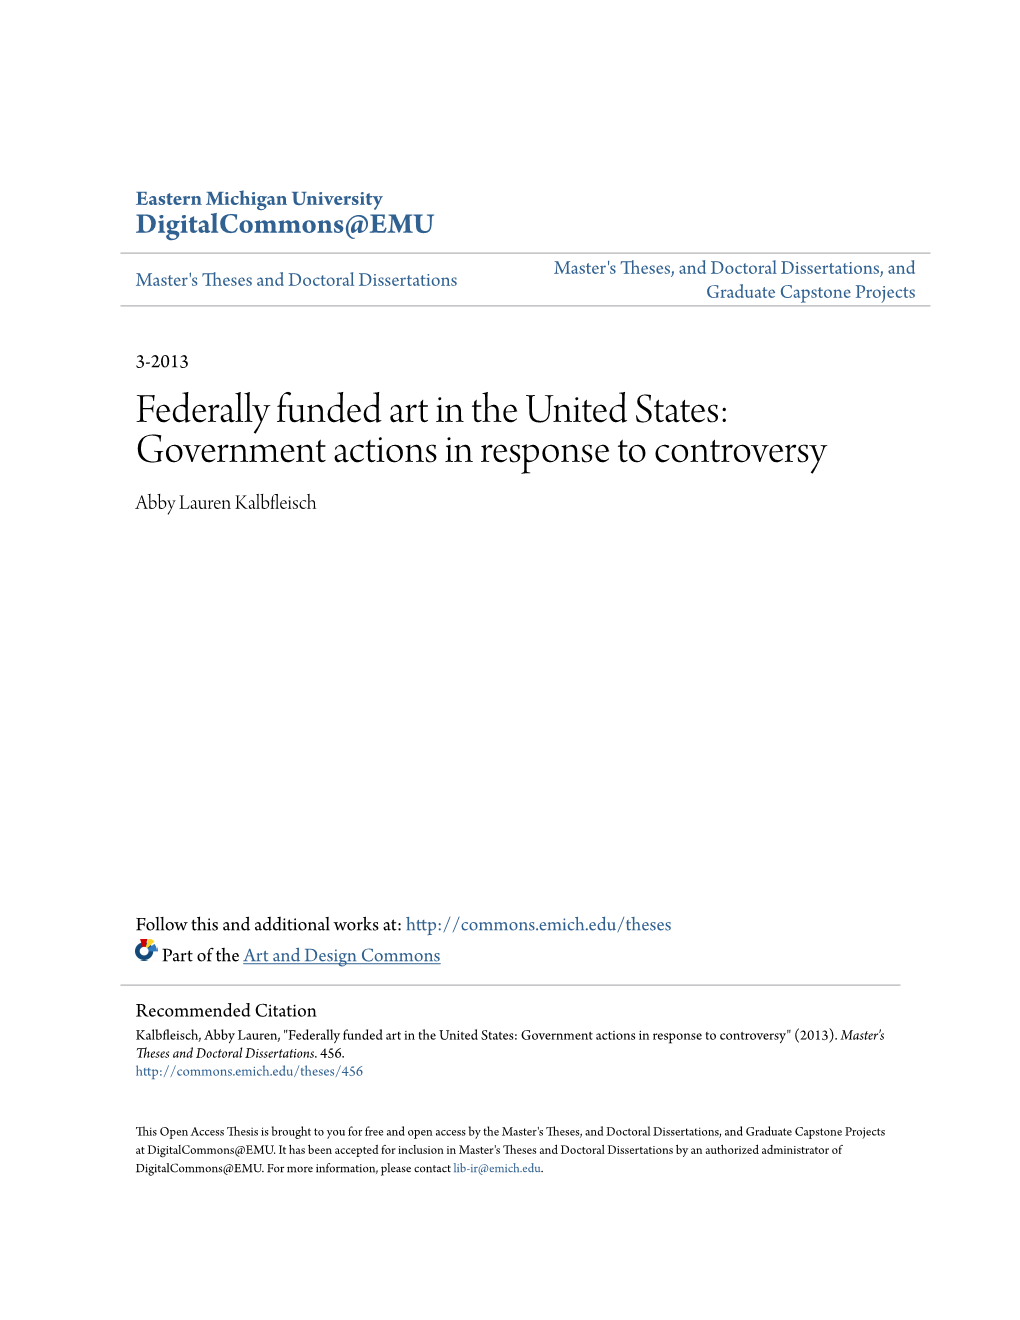 Federally Funded Art in the United States: Government Actions in Response to Controversy Abby Lauren Kalbfleisch